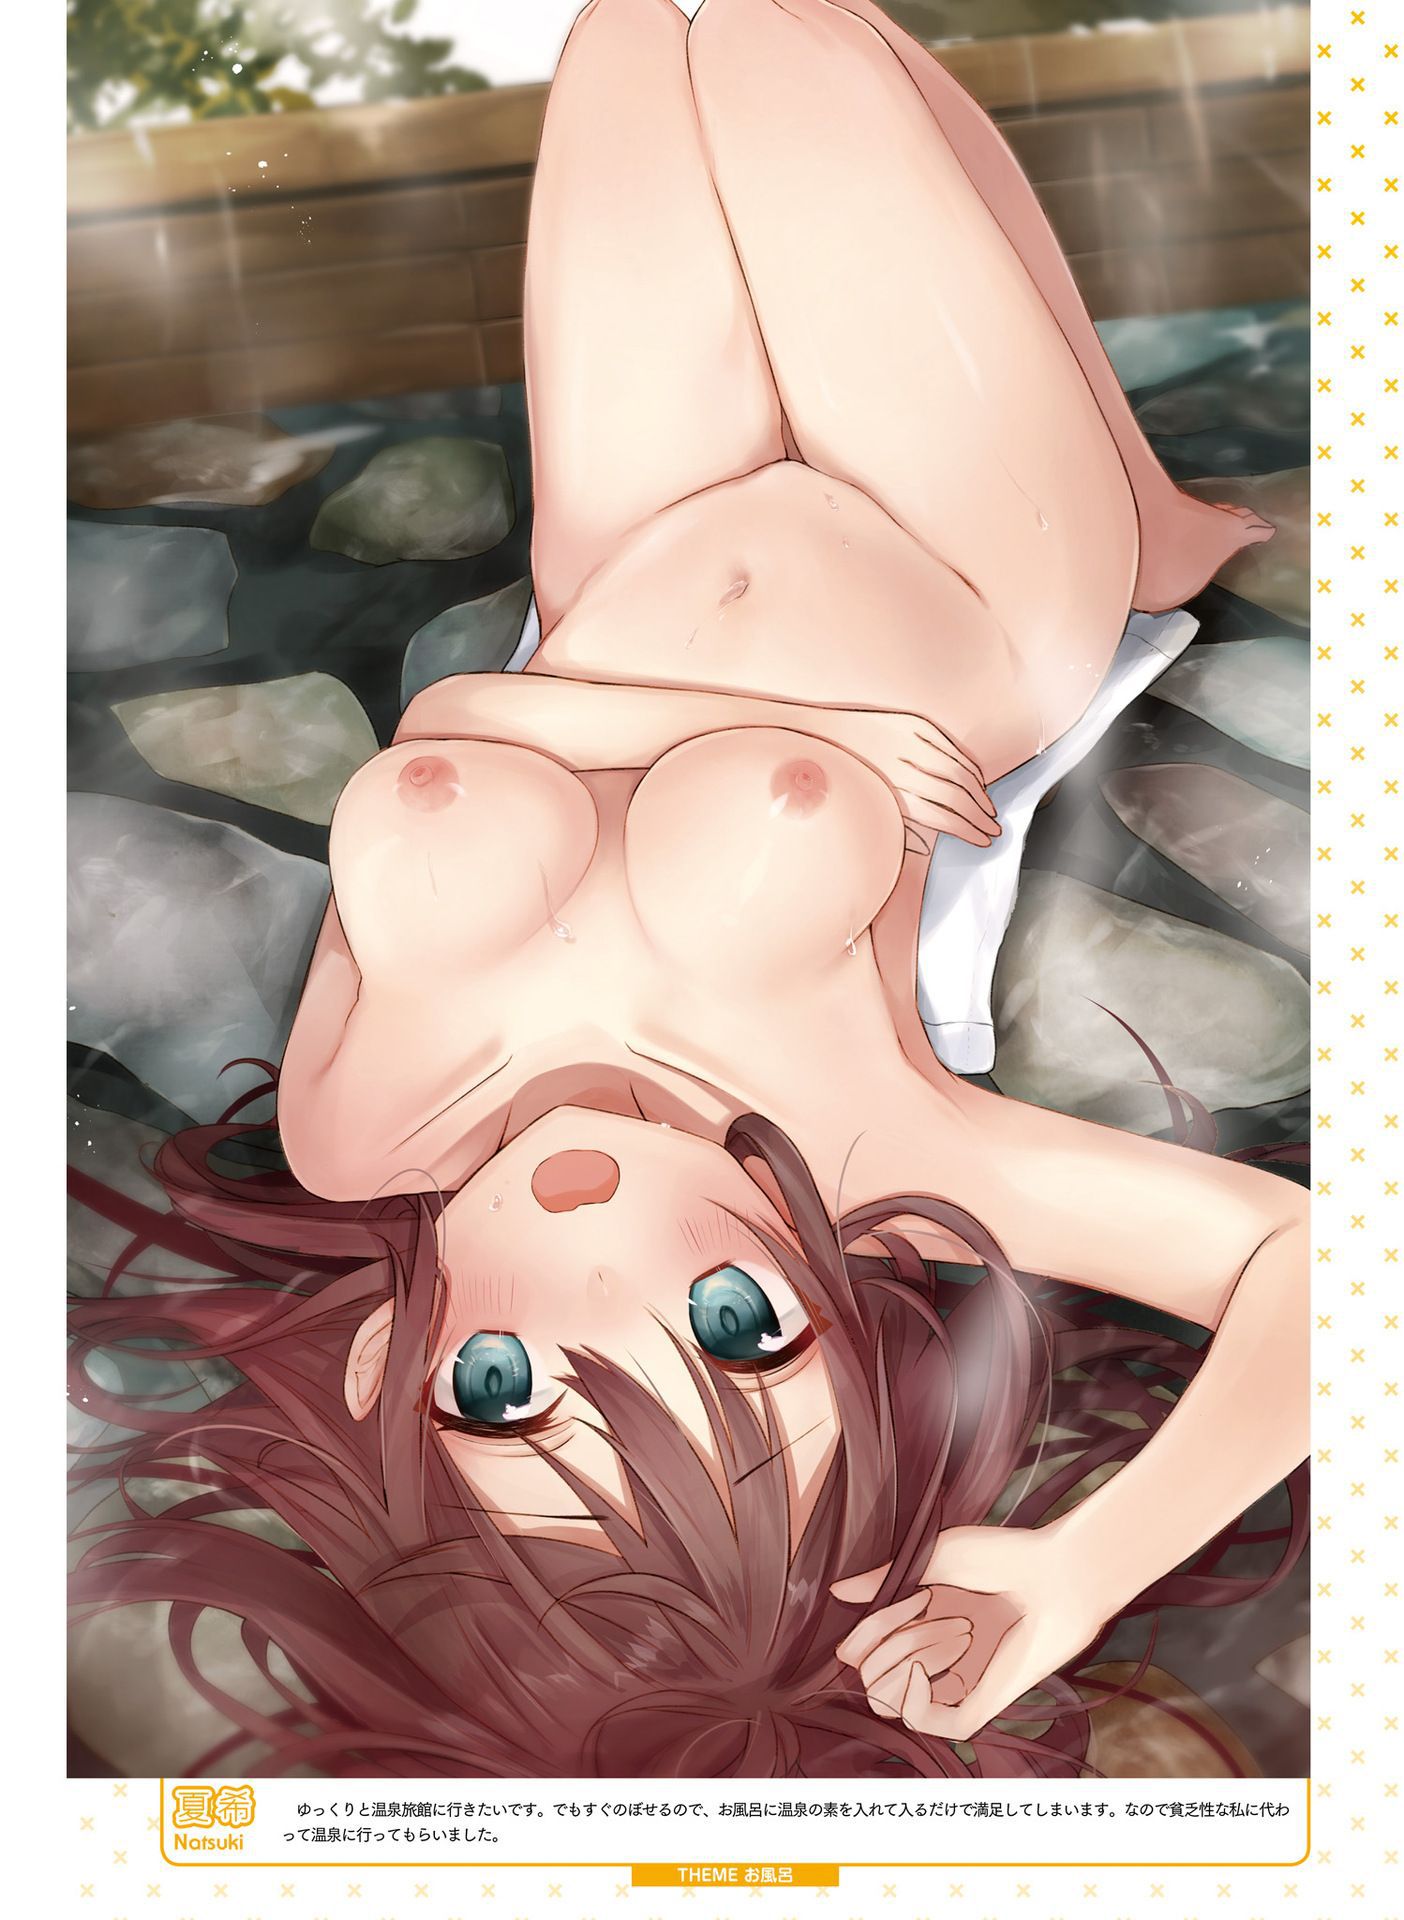 [secondary erotic] erotic image that beautiful girls are lying down in clothes [50 pieces] 18